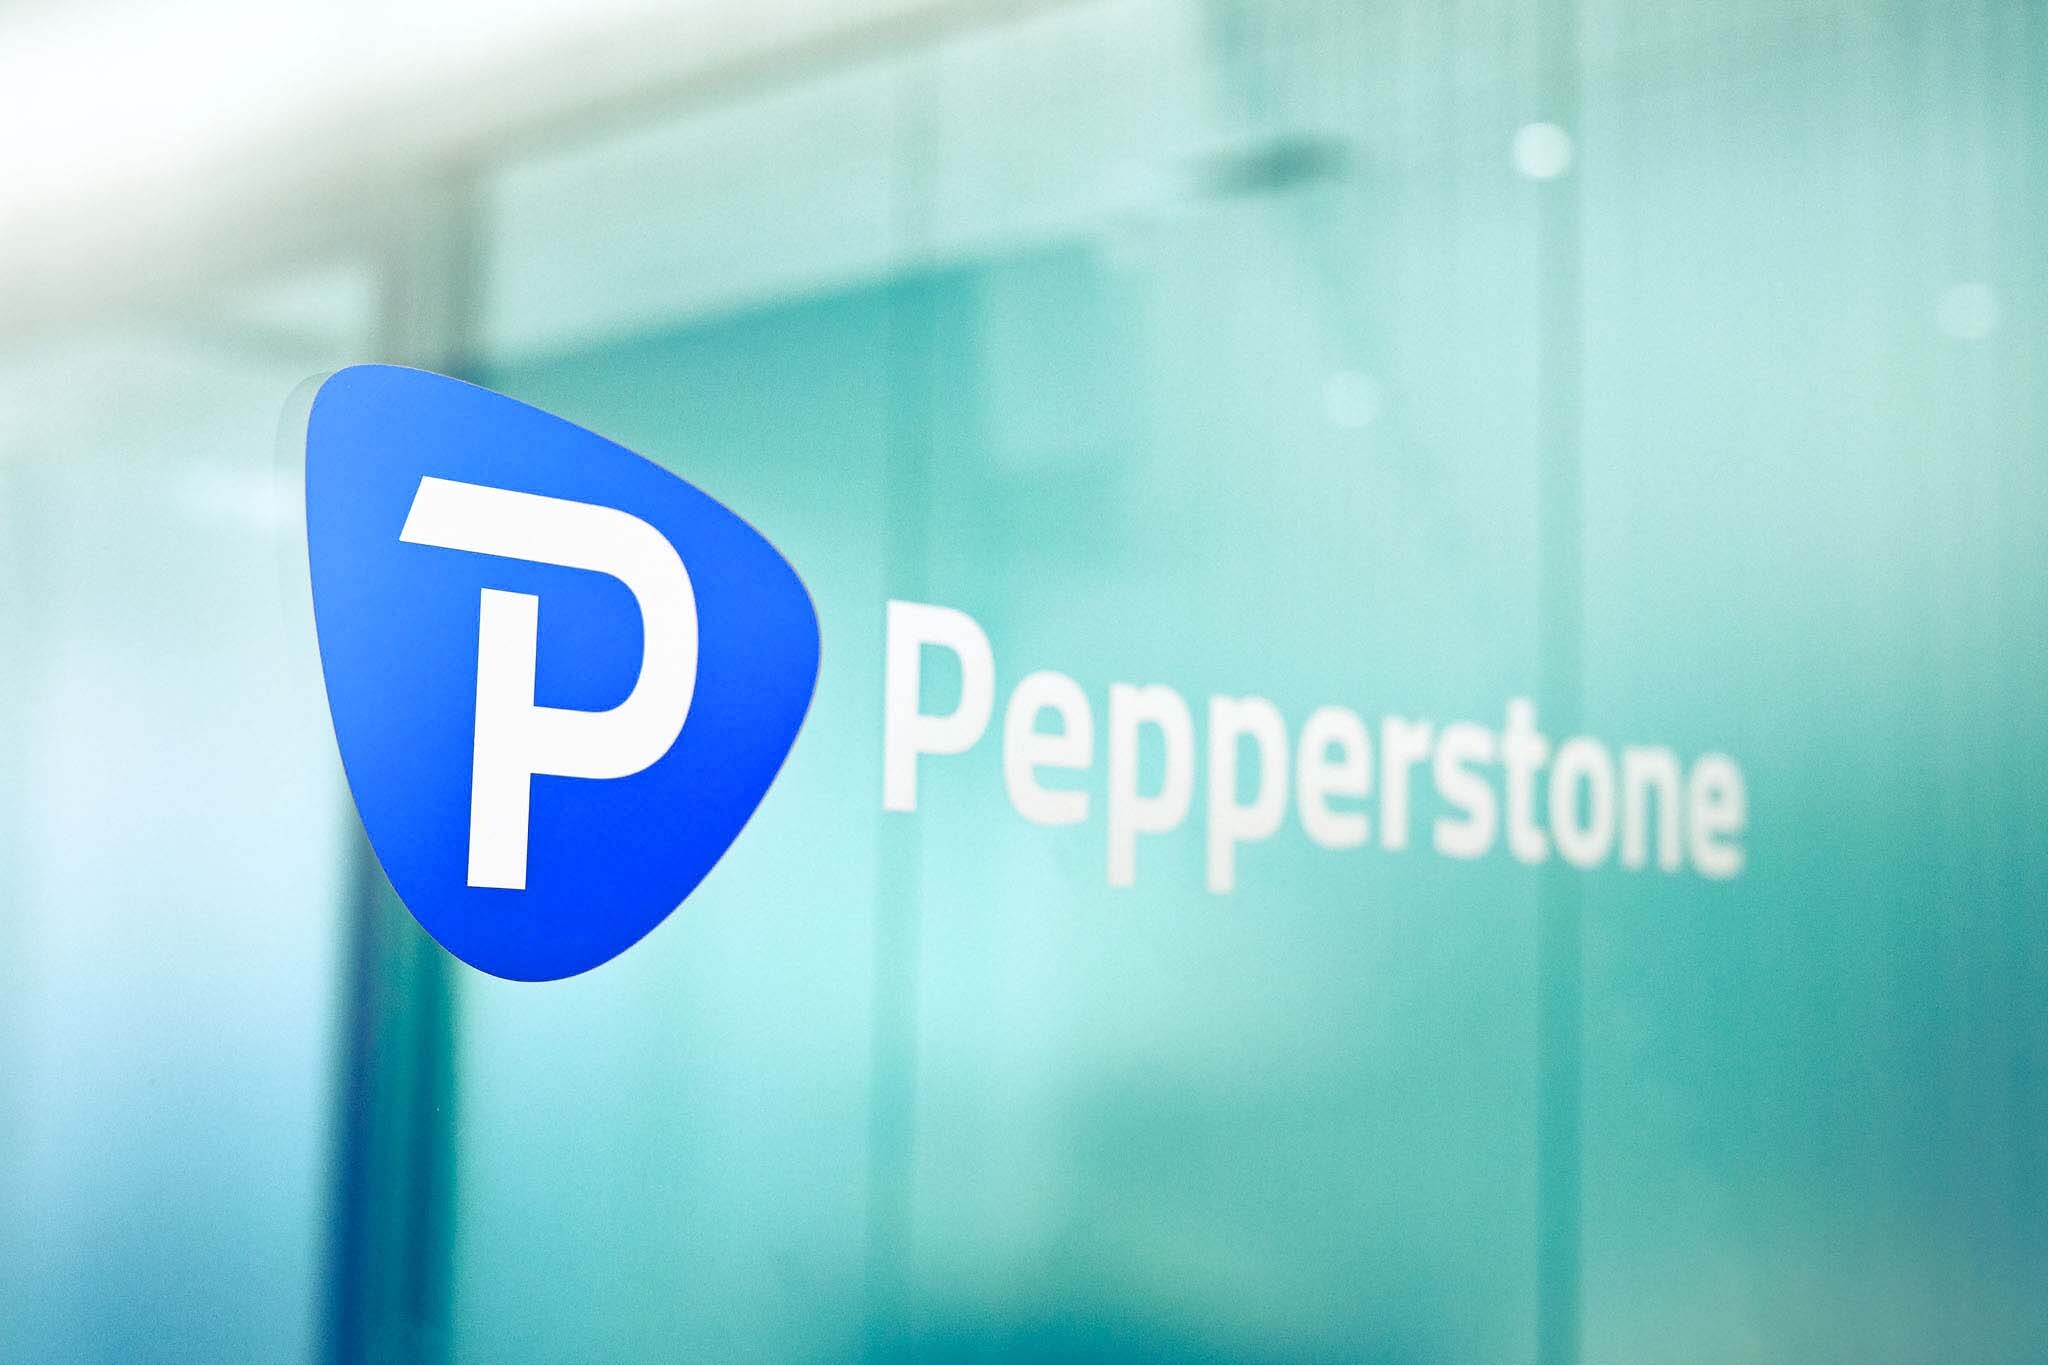 Pepperstone is one of the world's largest forex brokers